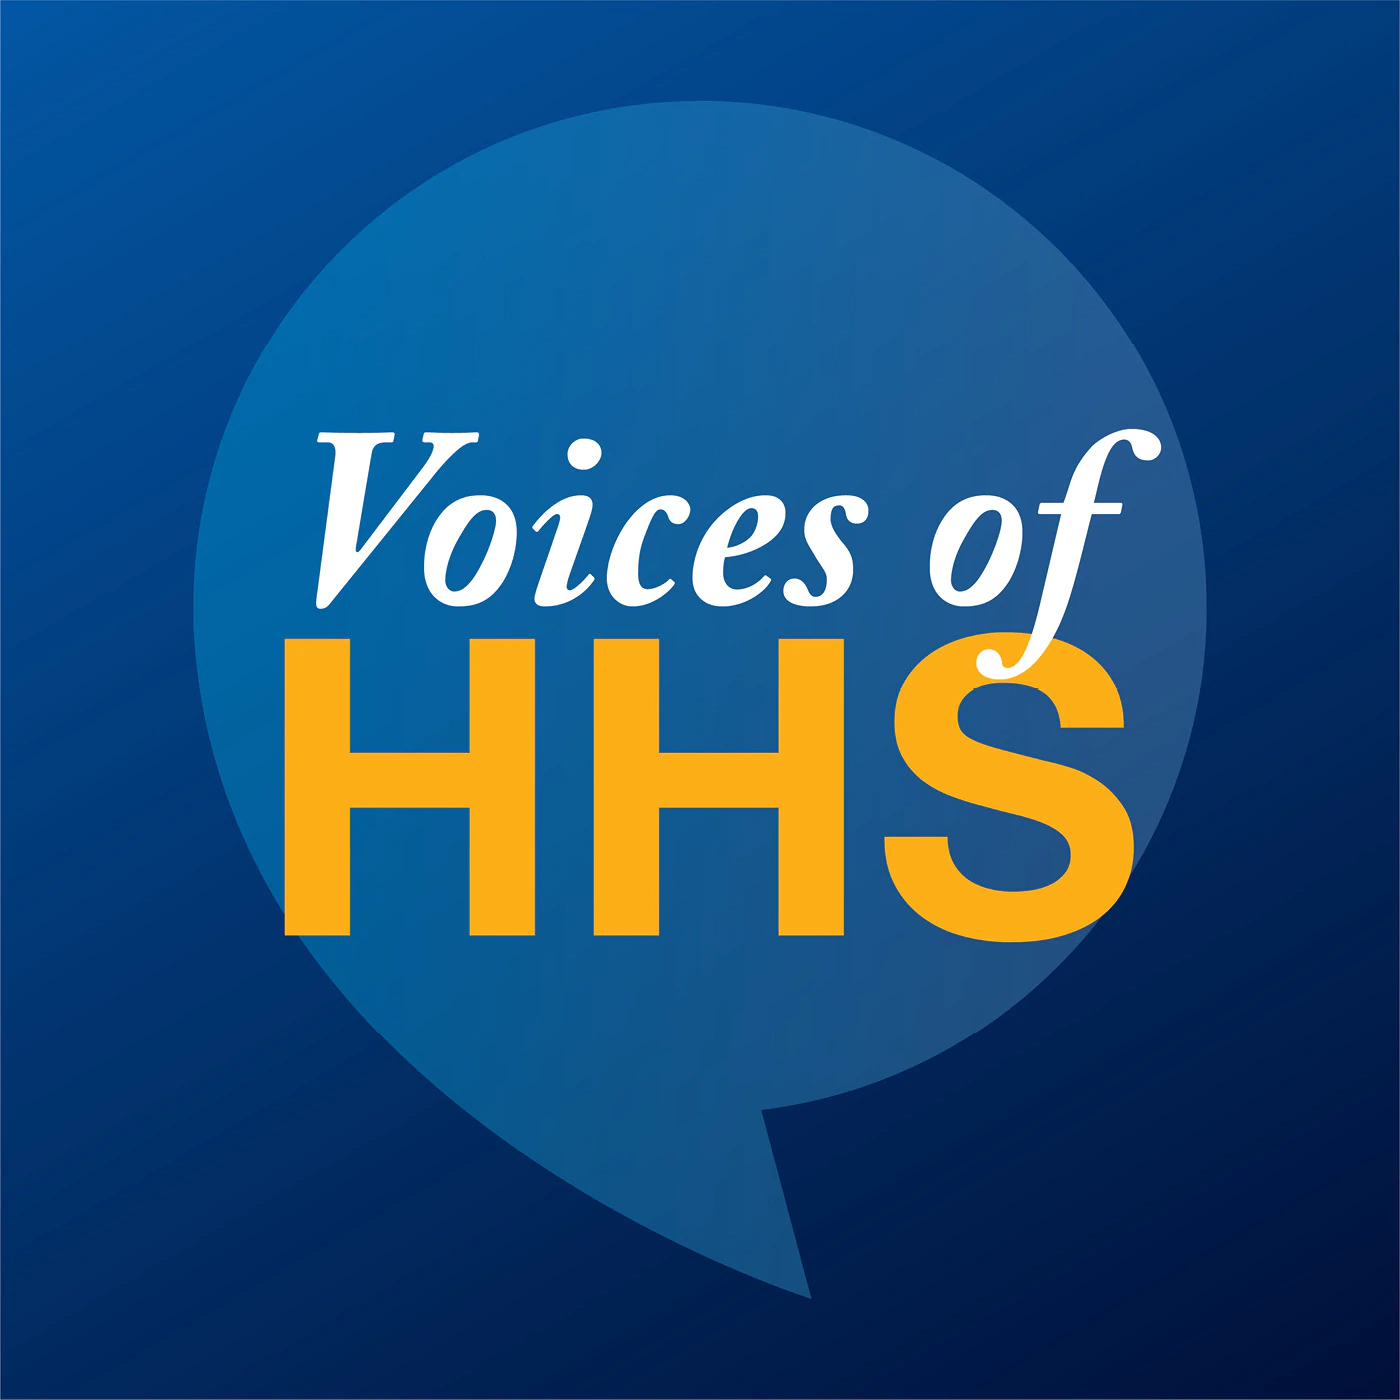 Voices of HHS logo (blue, with quote bubble)